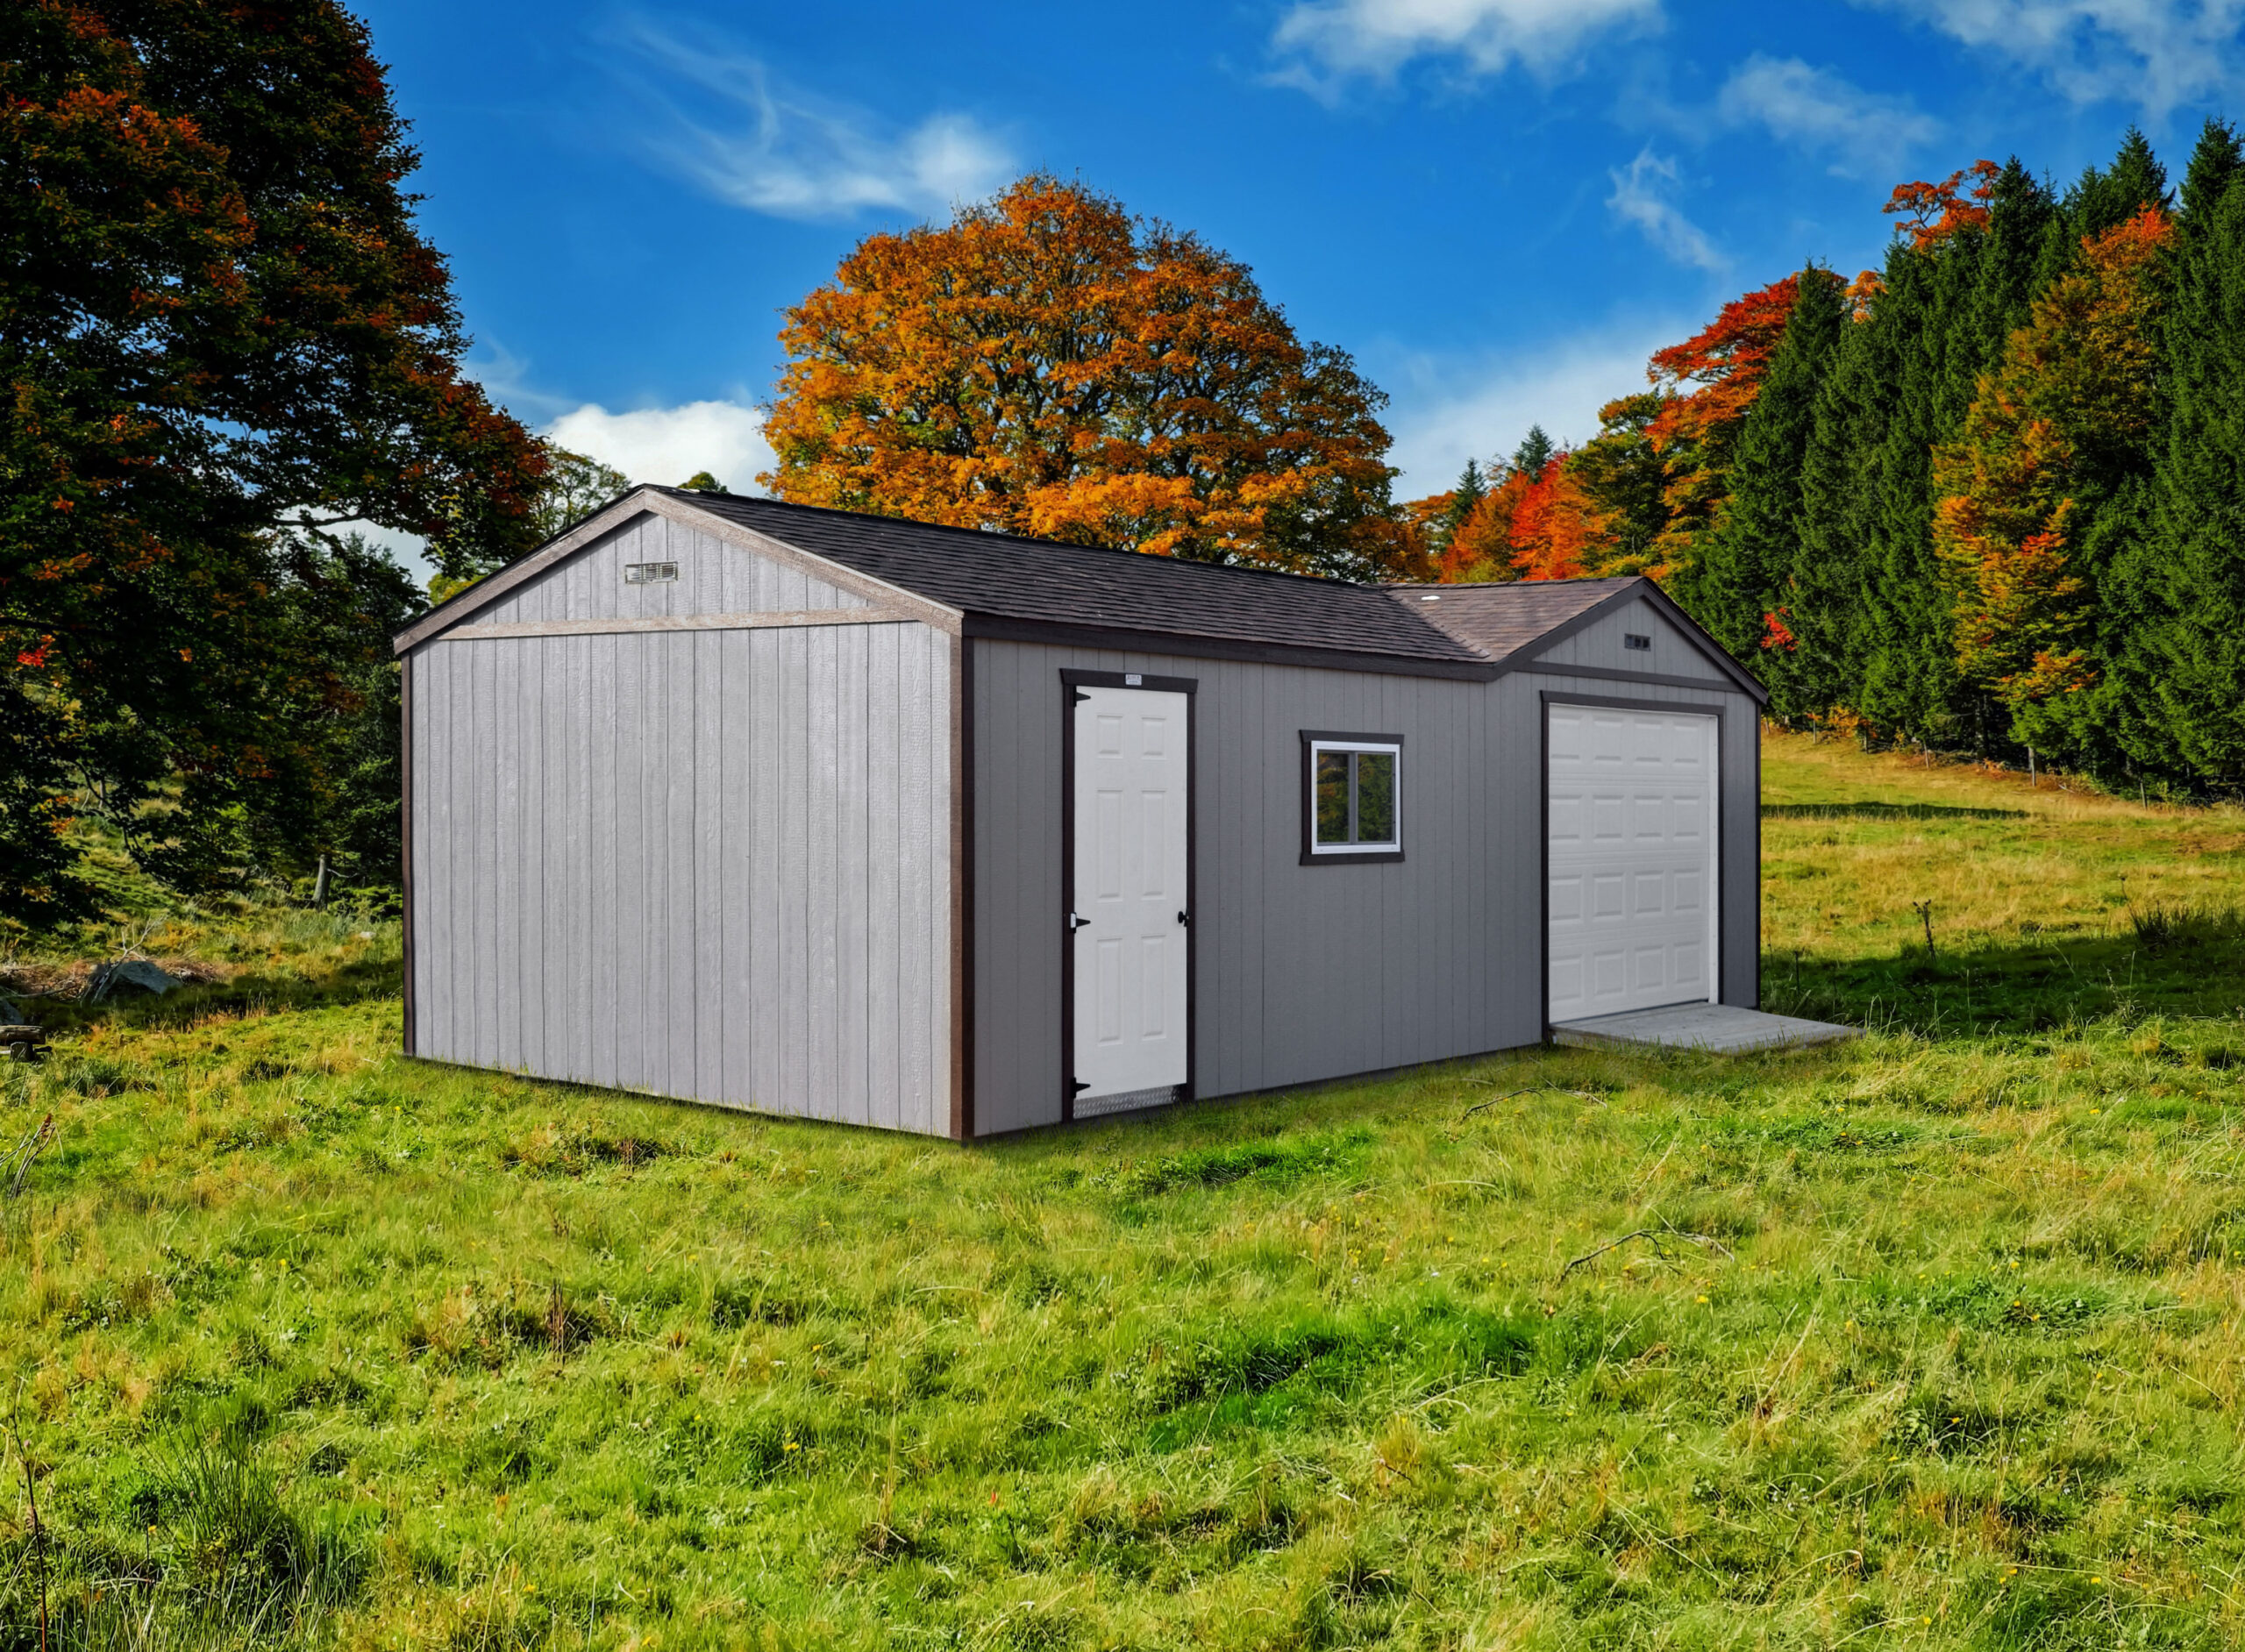 The Best of Both Worlds: Combination Garage and Storage Units